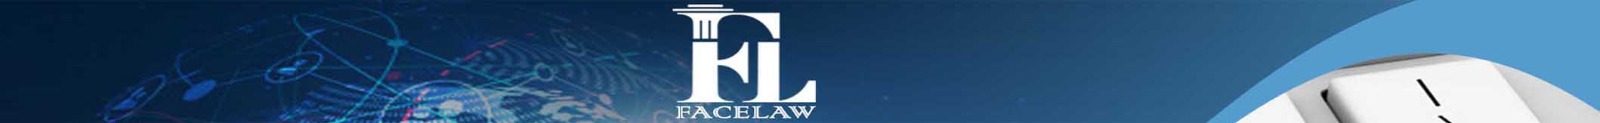 list of iranian litigation lawyers in canada